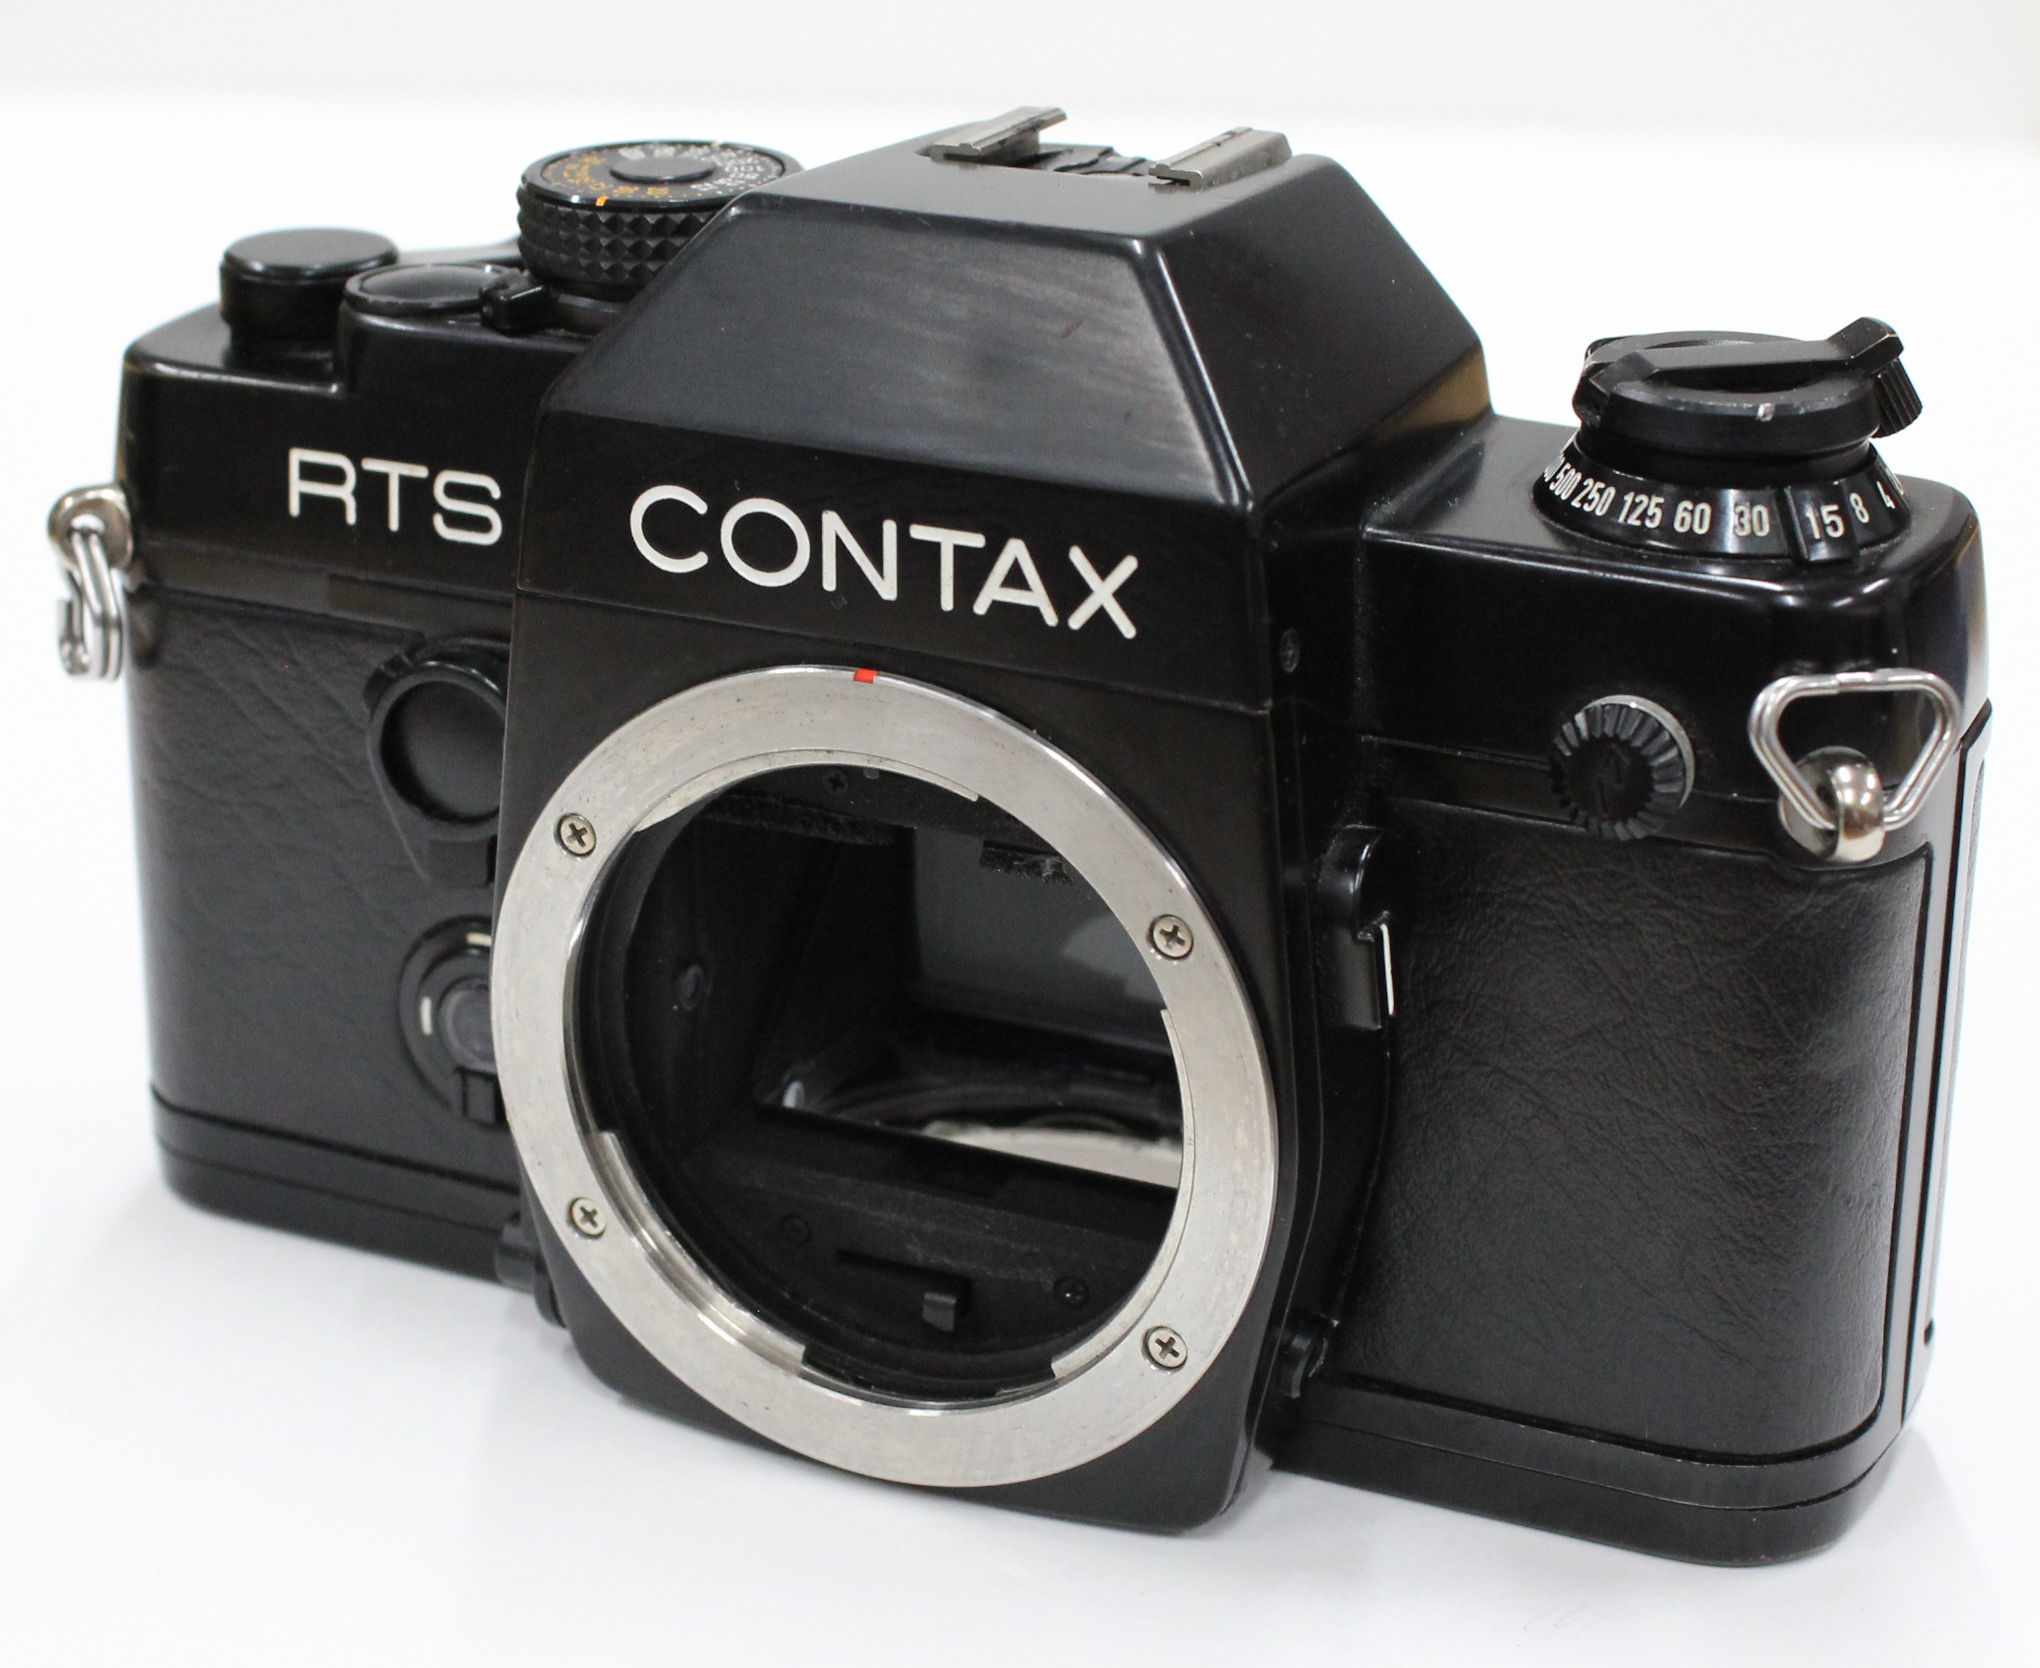 [Excellent +++] Contax RTS II Quartz 35mm SLR Film Camera Body from Japan